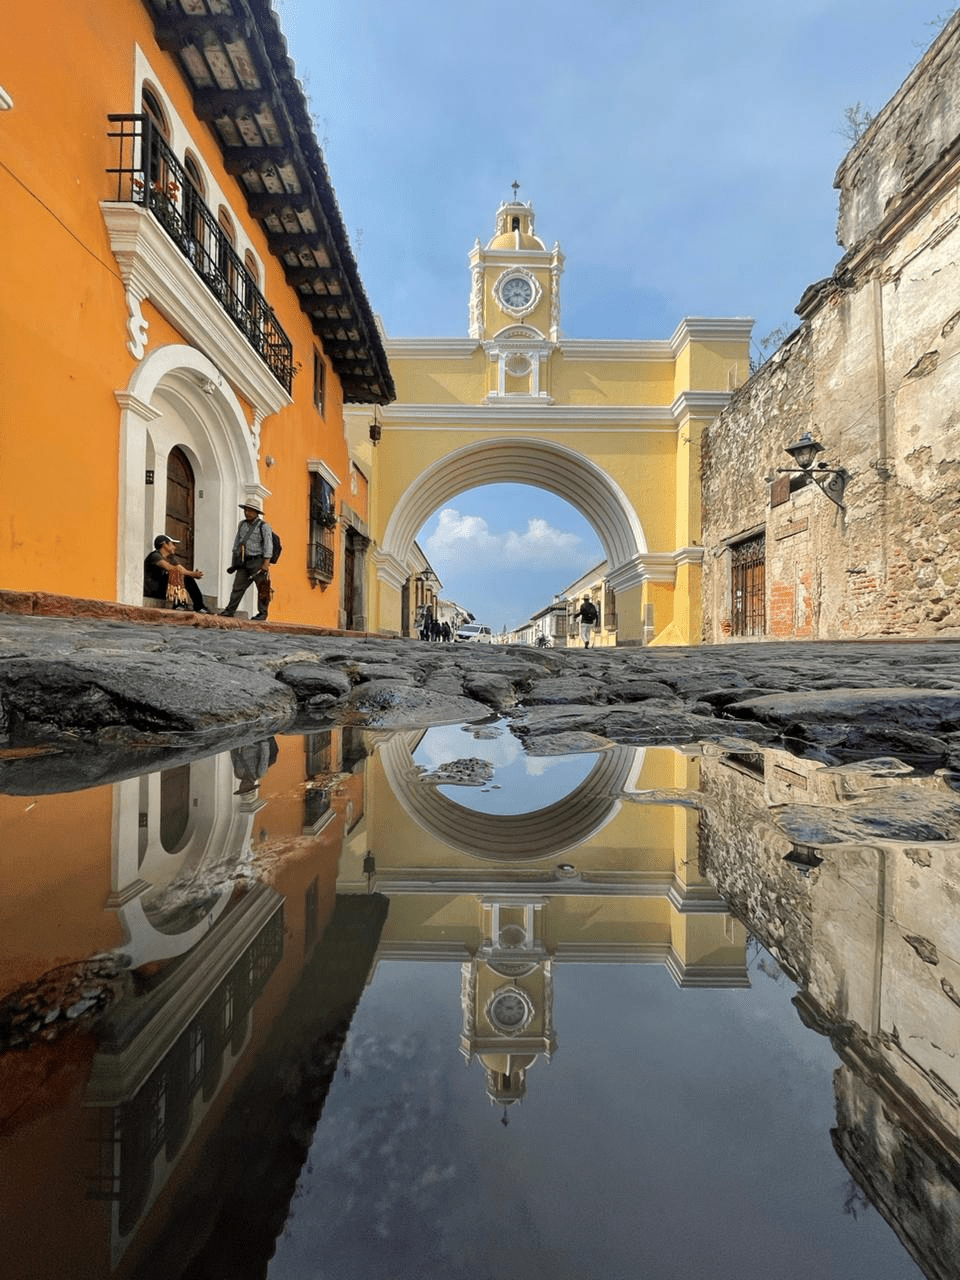 Santa Catarina arch in Antigua, a beautiful colonial city build after the spanish conquest.